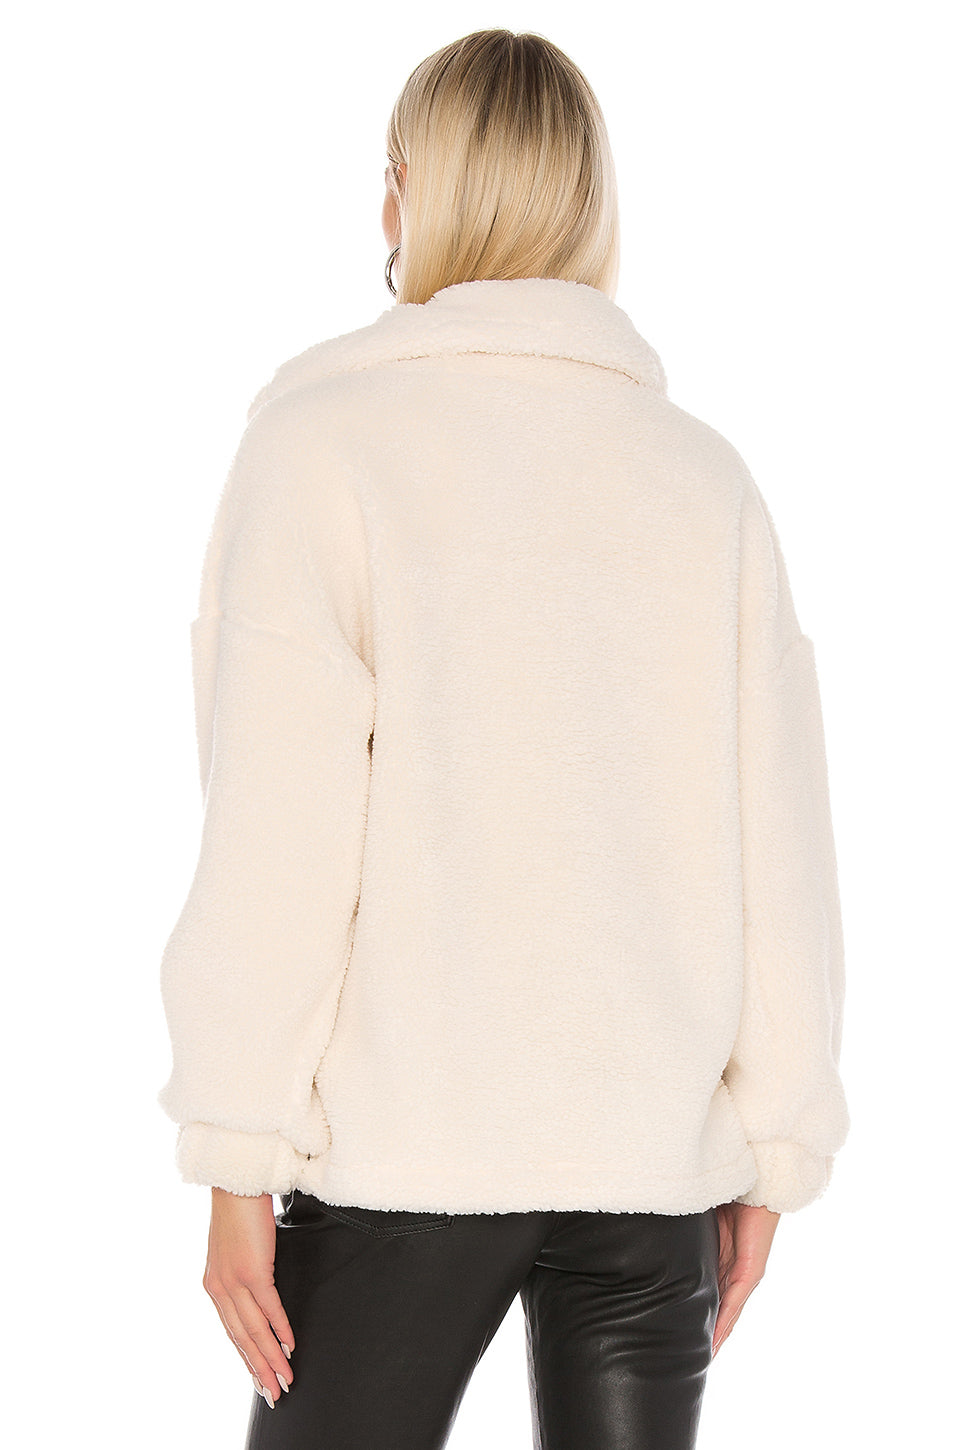 Saturn Pullover in IVORY